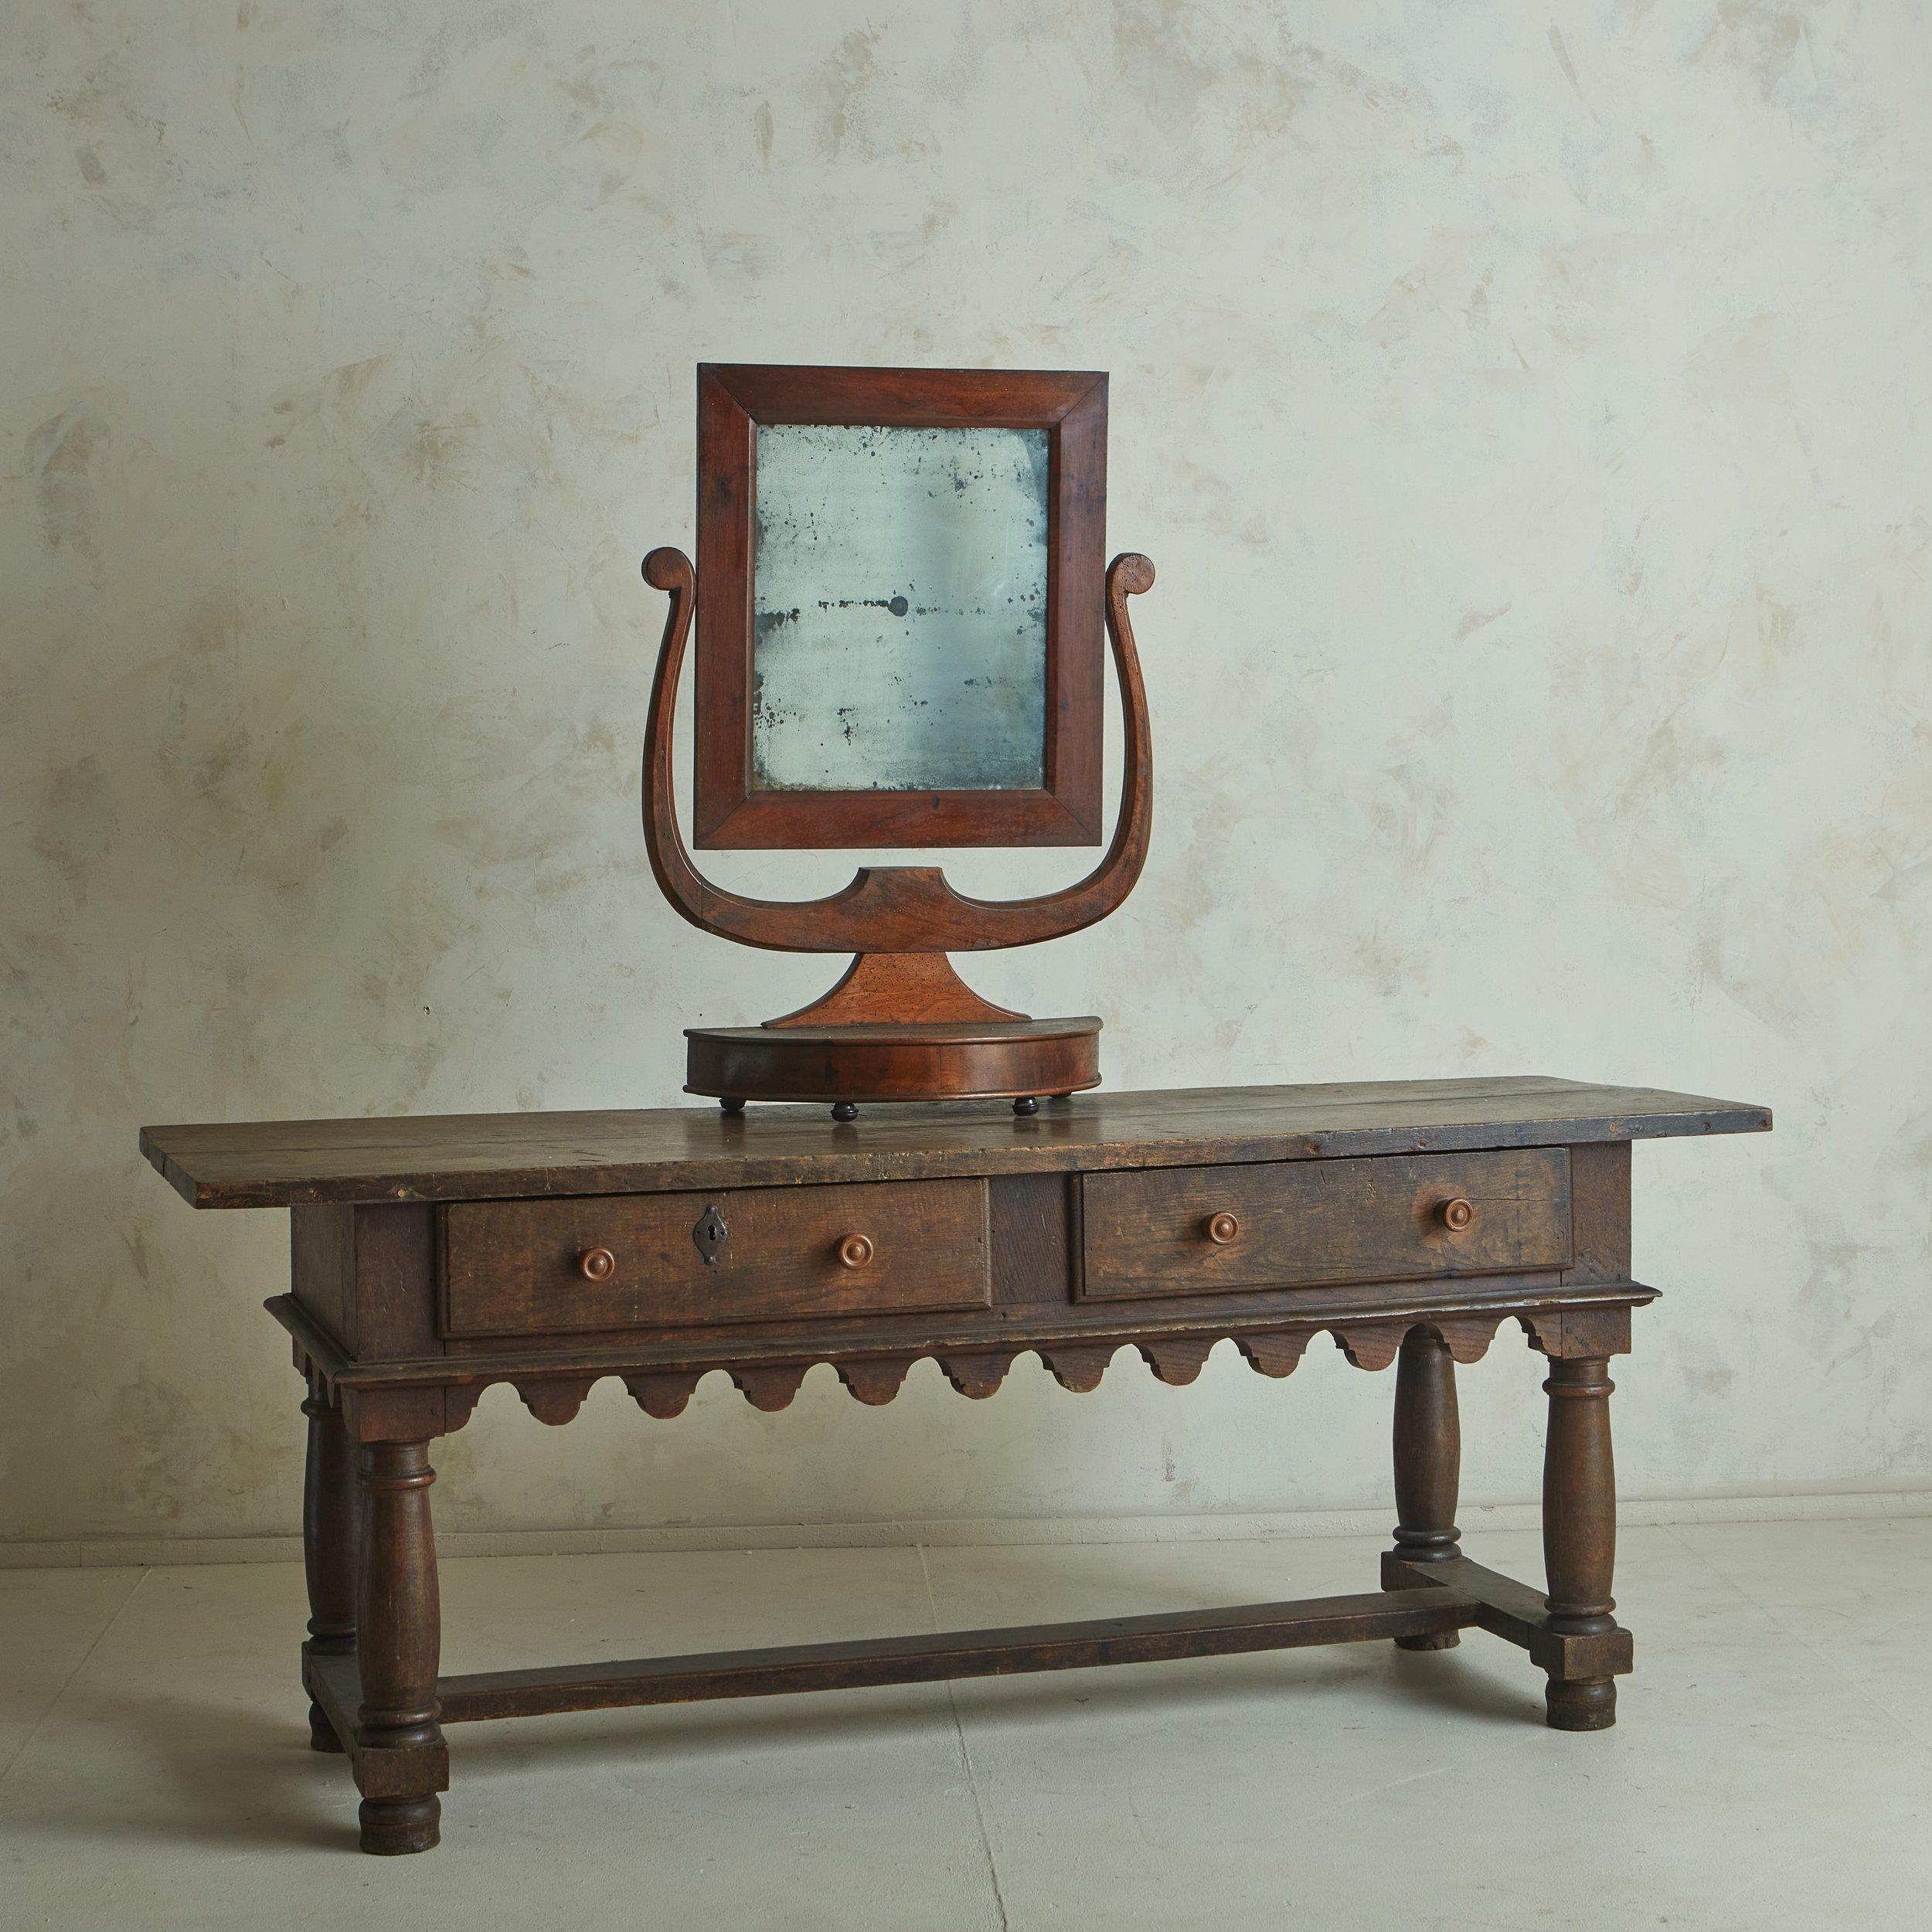 A handsome antique vanity mirror with a harp walnut frame and a demilune pedestal base. The frame supports a rectangular pivoting antiqued mirror and stands on four black metal feet. This piece has a gorgeous patina and features excellent